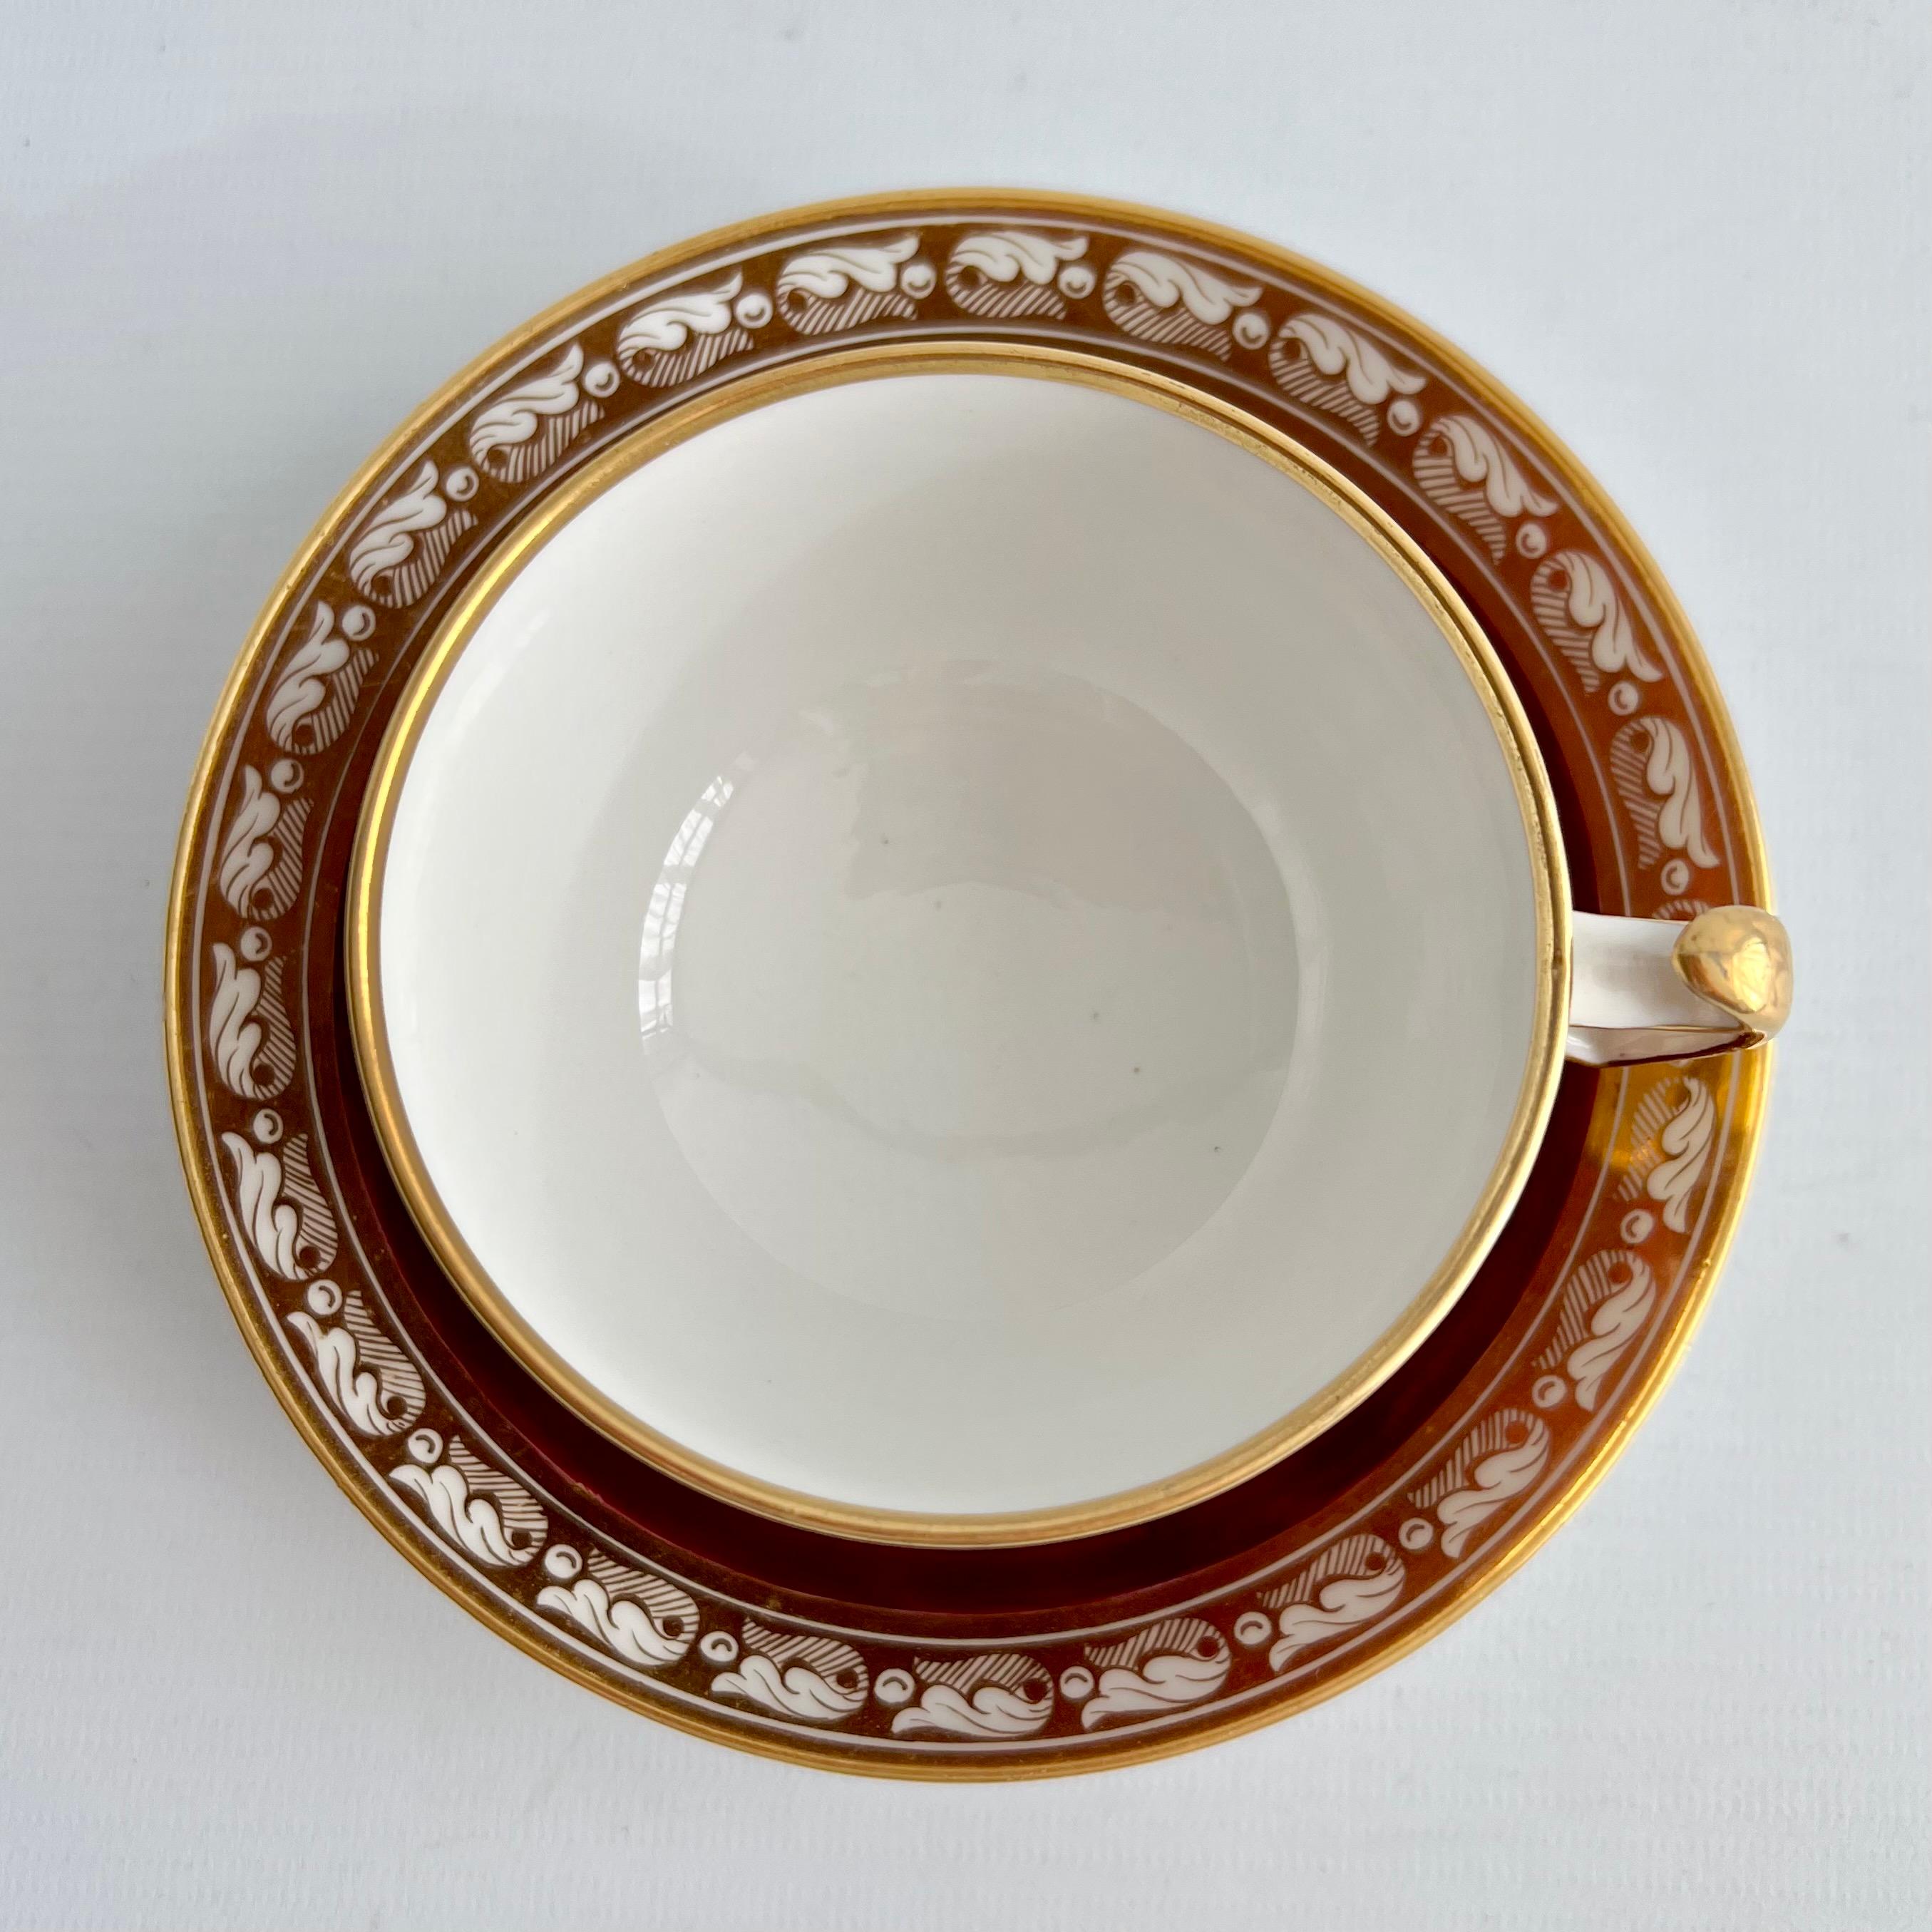 Early 19th Century Barr Flight & Barr Teacup Trio, Maroon and Gilt Neoclassical ca 1812